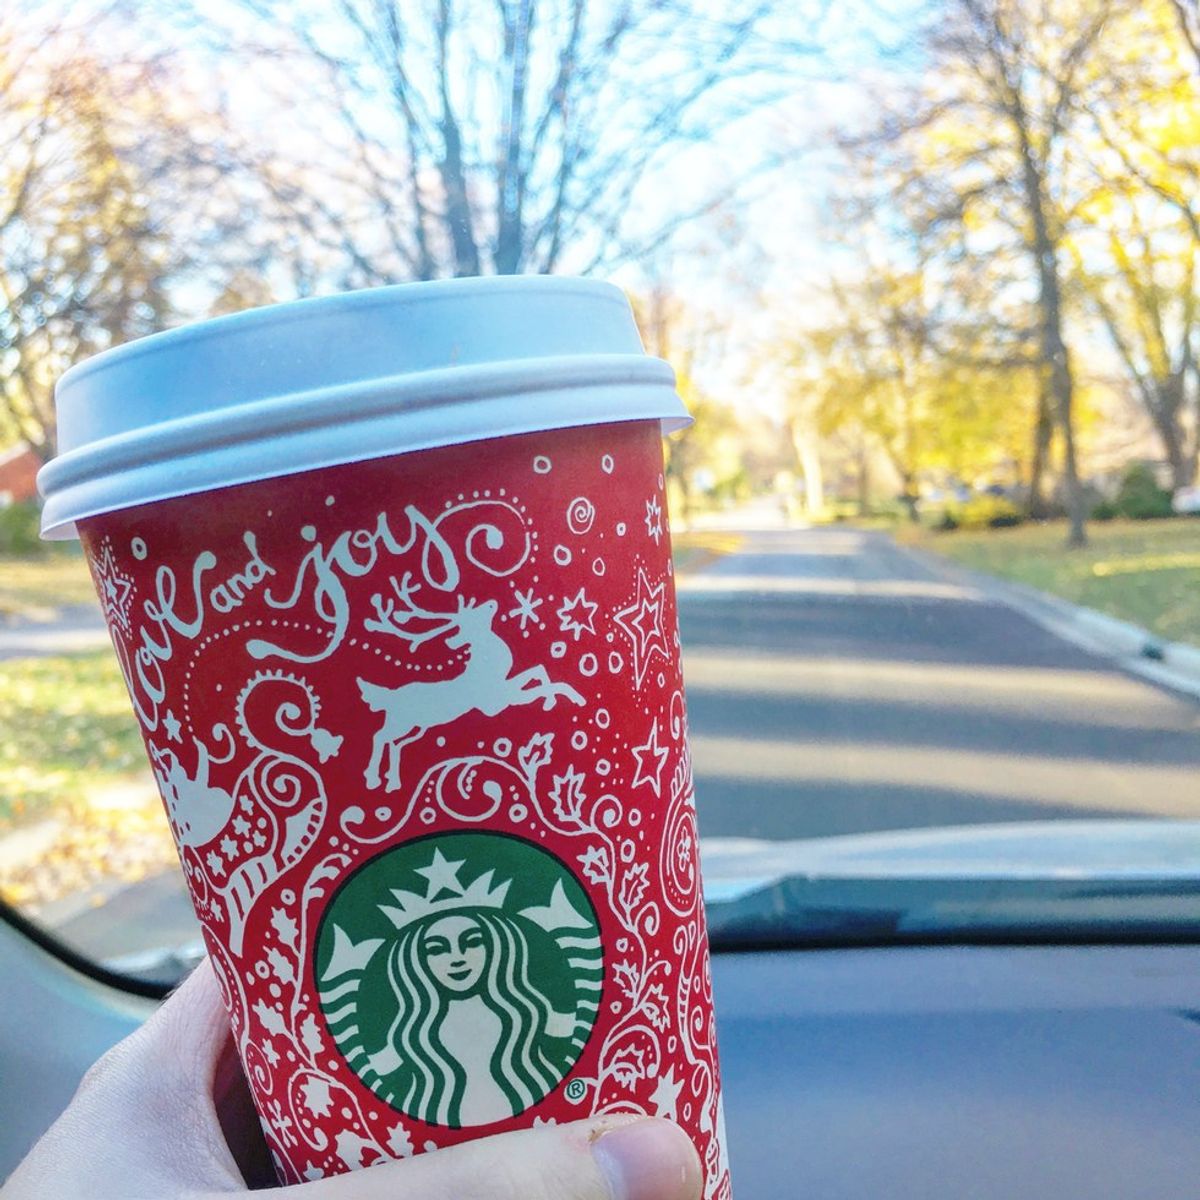 Starbucks Red Cups Are Here!